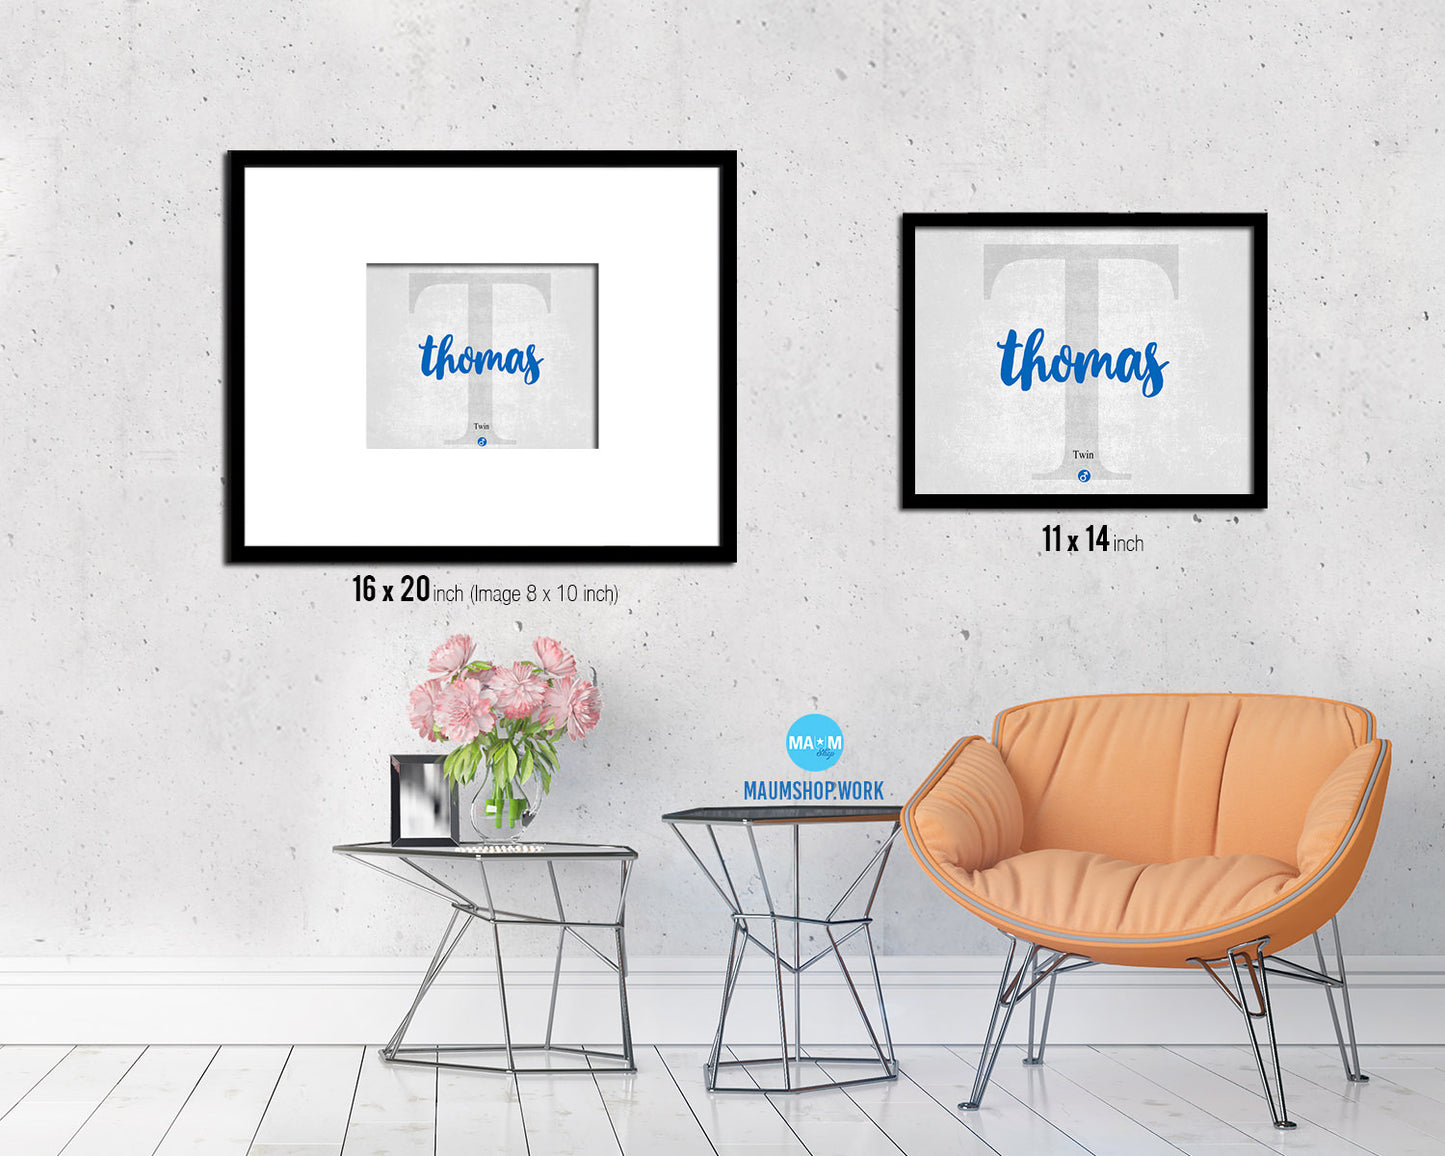 Thomas Personalized Biblical Name Plate Art Framed Print Kids Baby Room Wall Decor Gifts